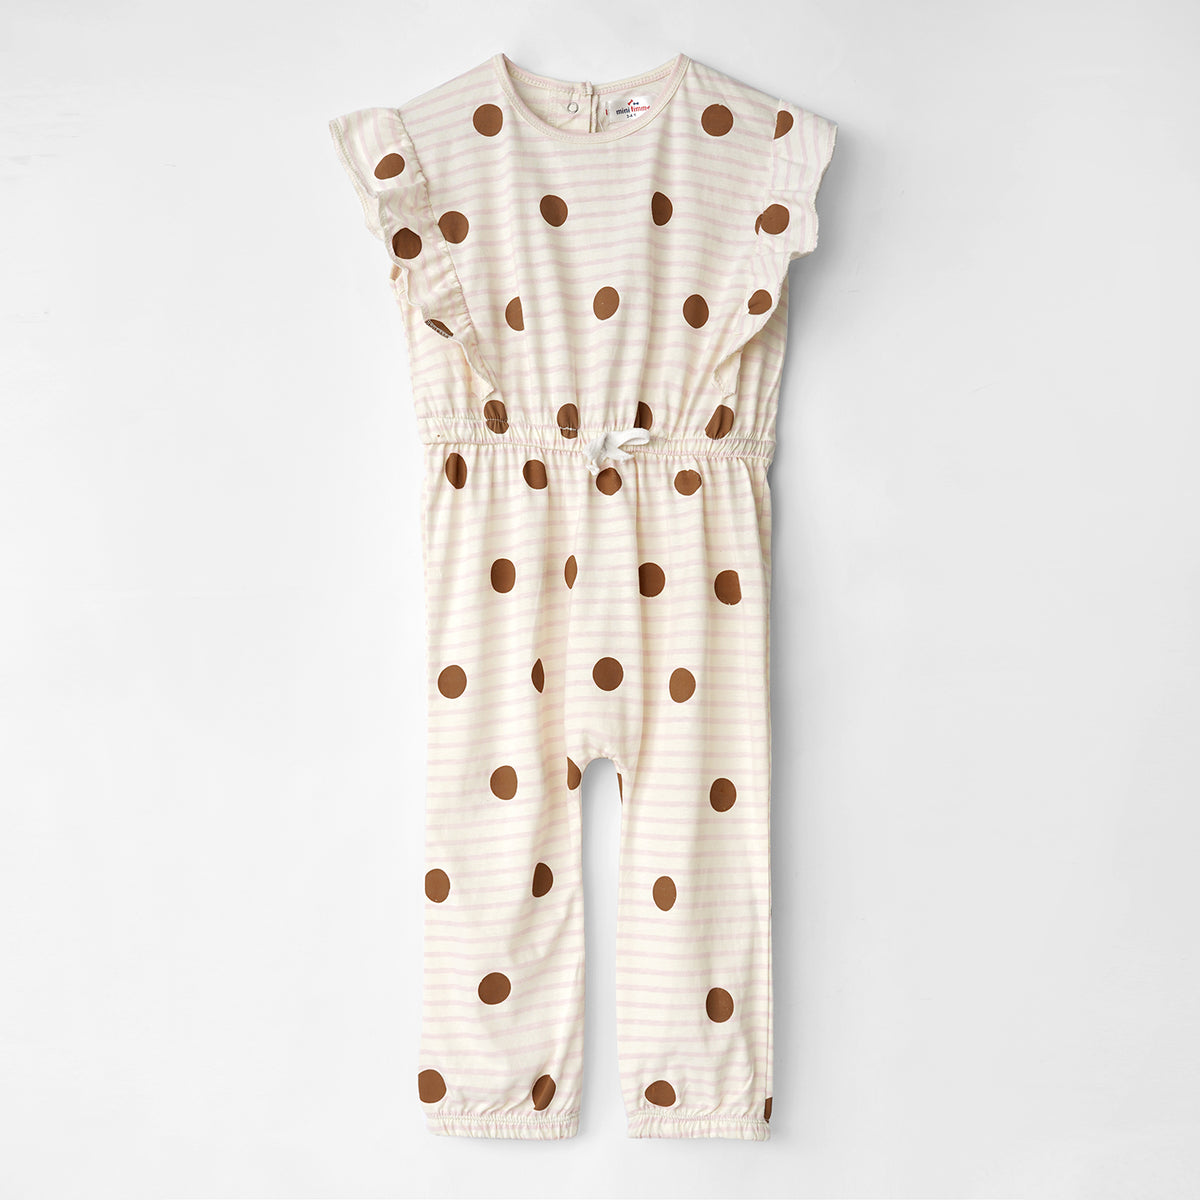 Girls Fashion All-Over Polka Dots Printed Soft Cotton Frill Stripe Jumpsuit 110